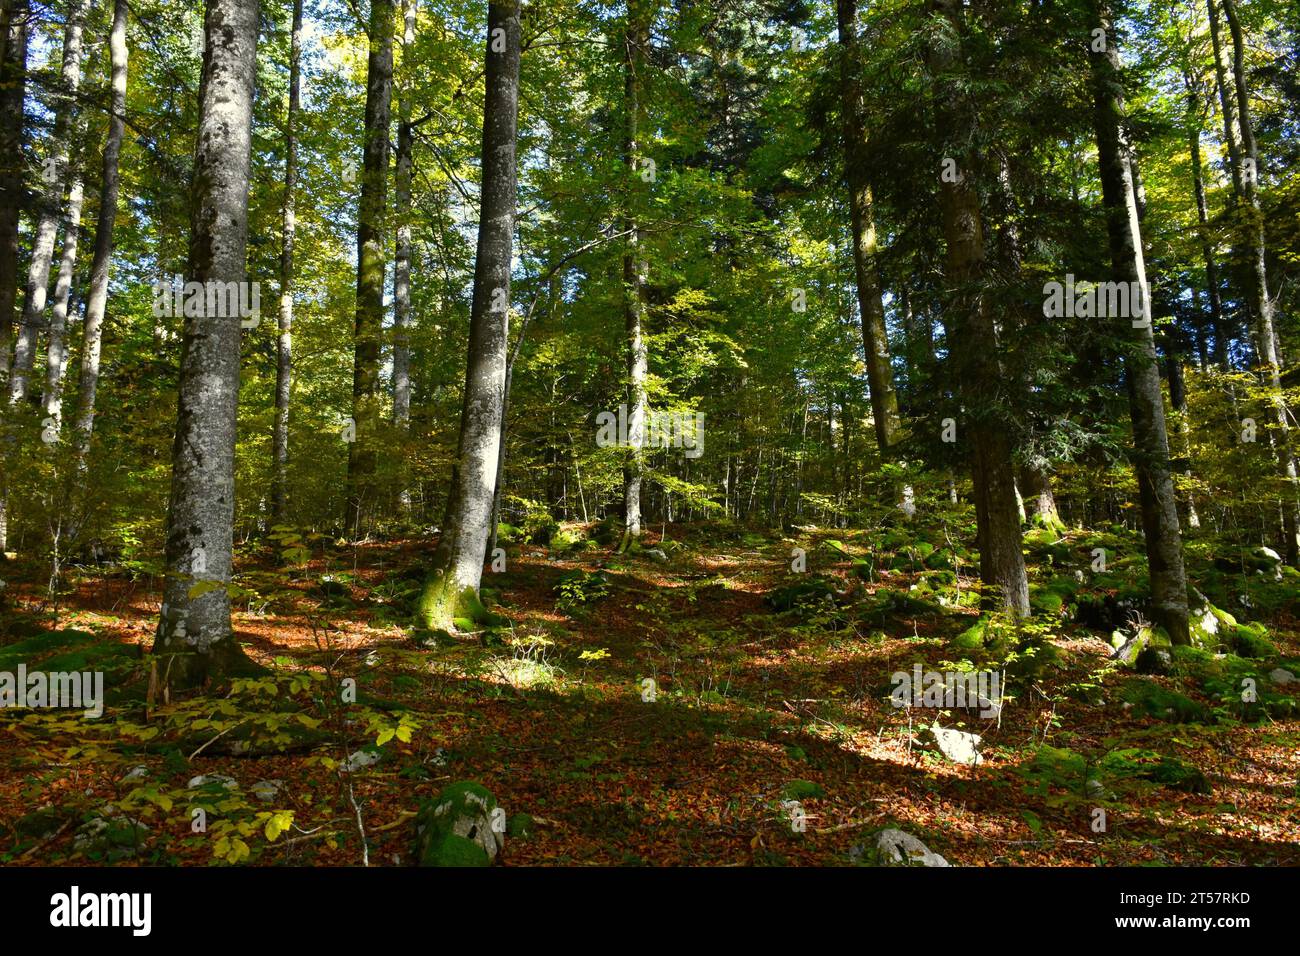 Beech (Fagus sylvatica) and fir (Abies alba) temperate mixed deciduous, broadleaf and conifer forest Stock Photo